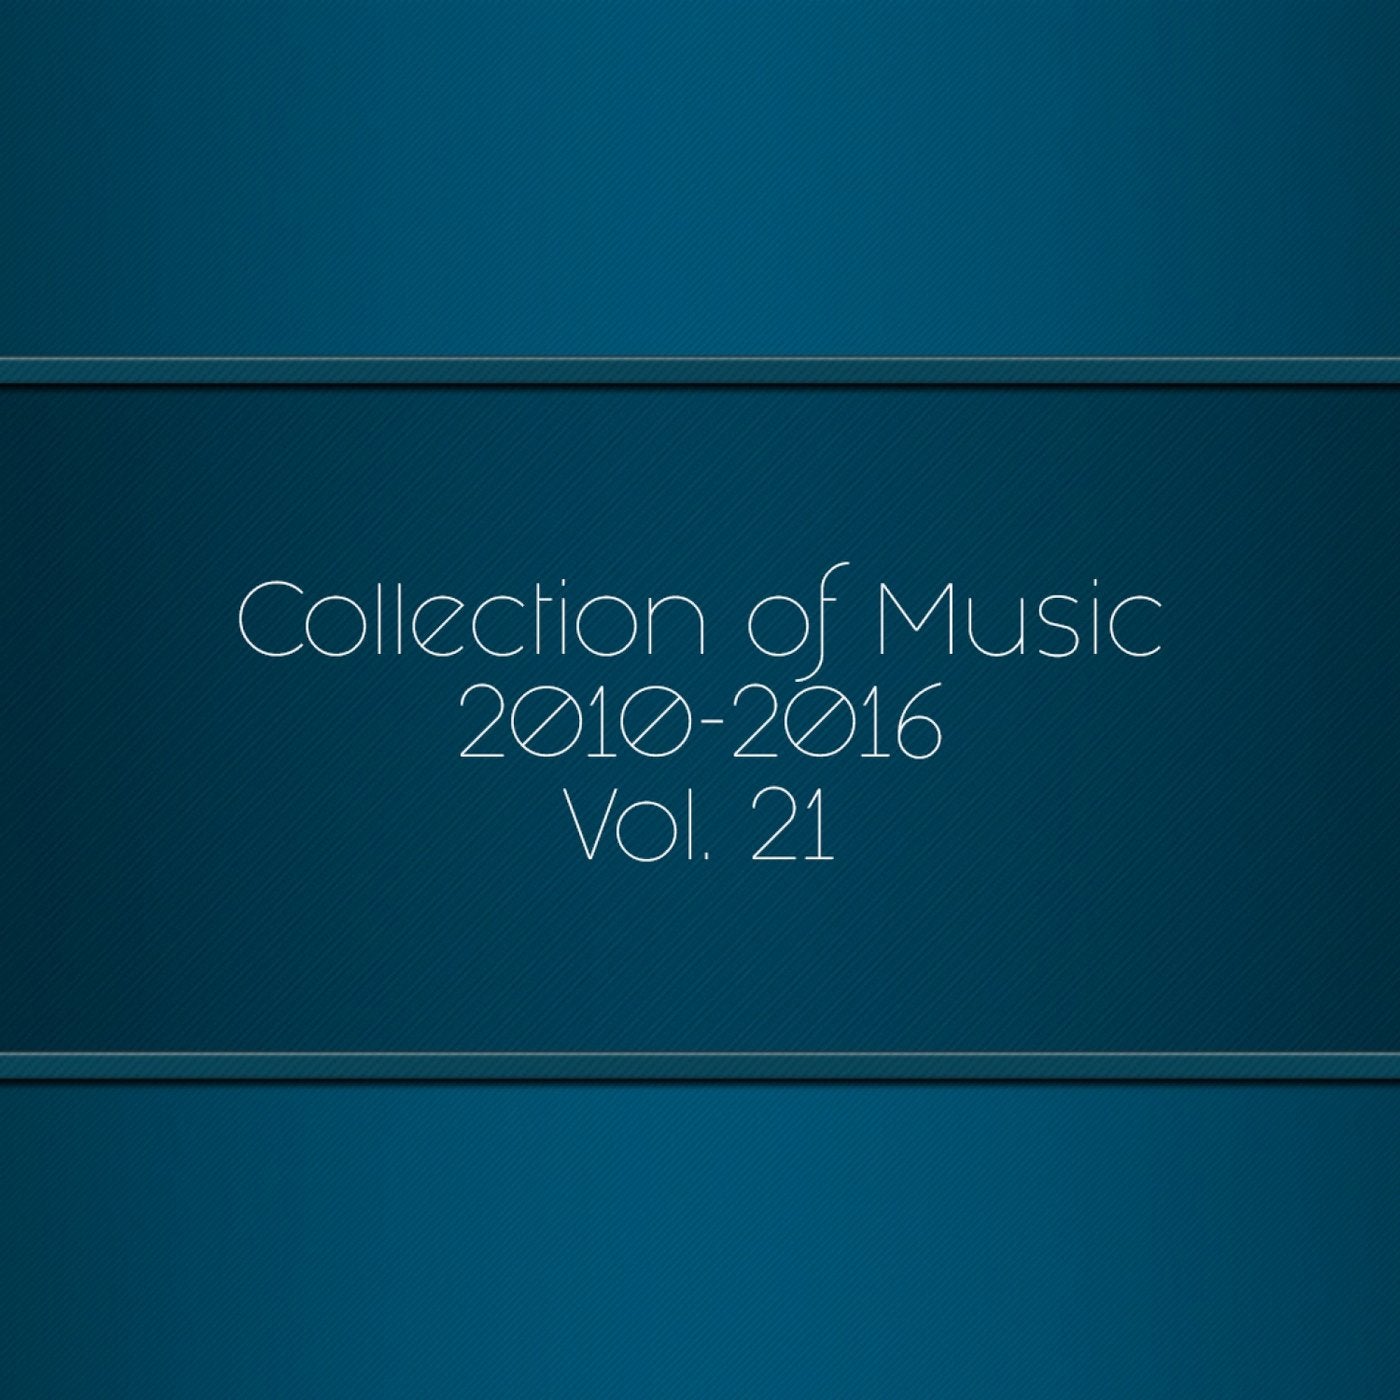 Collection of Music 2010-2016, Vol. 21